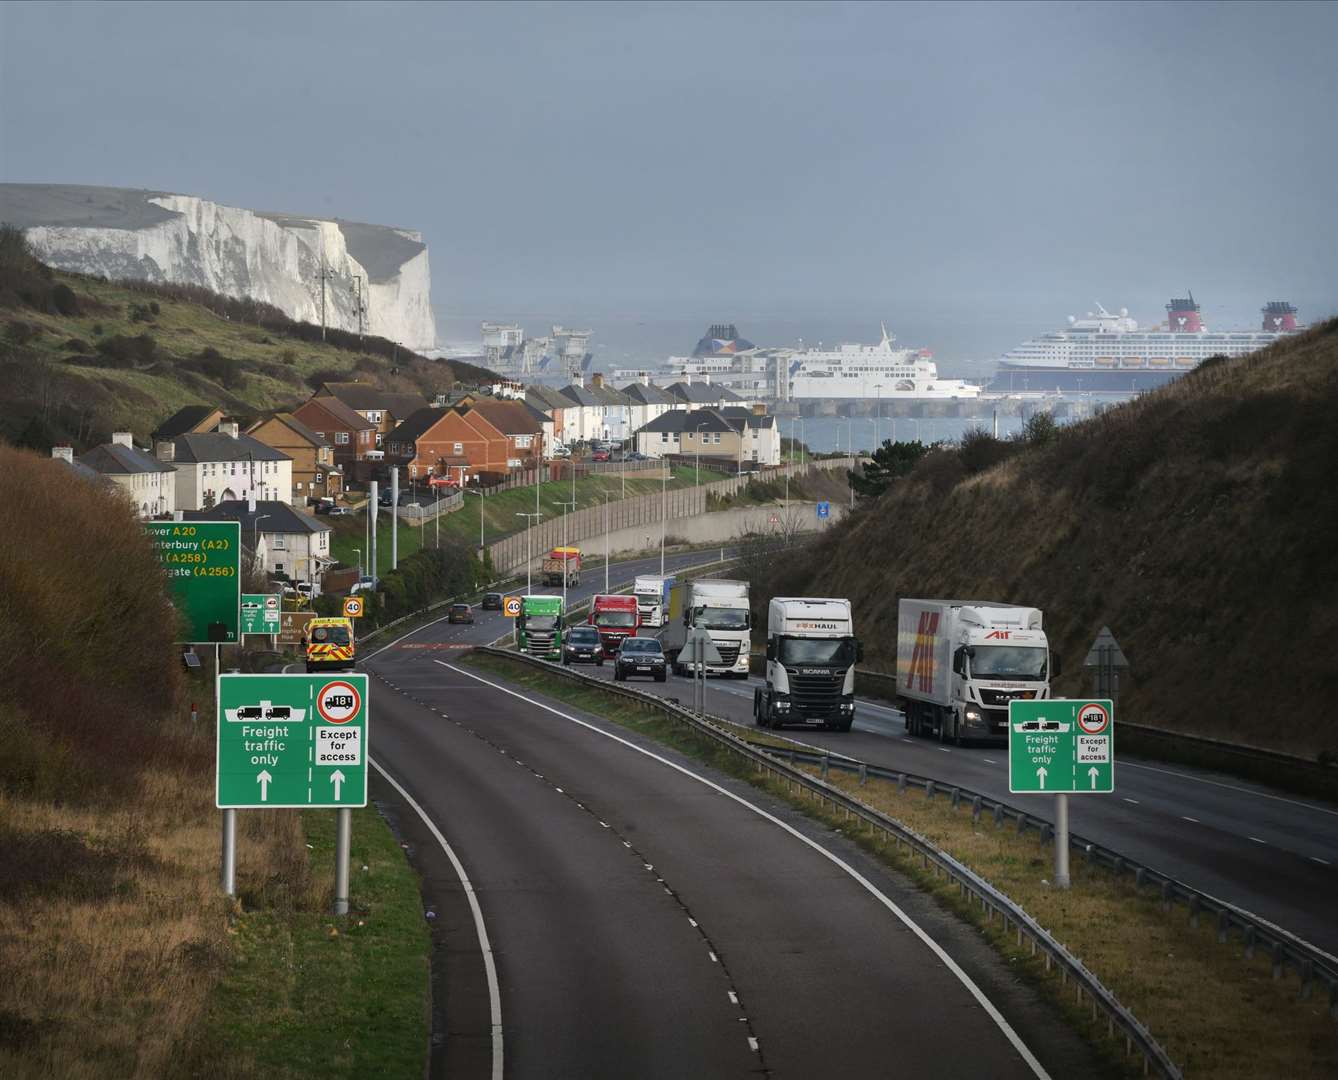 Freight lorries and traffic pass through the Port of Dover - the closest part of the UK to mainland Europe